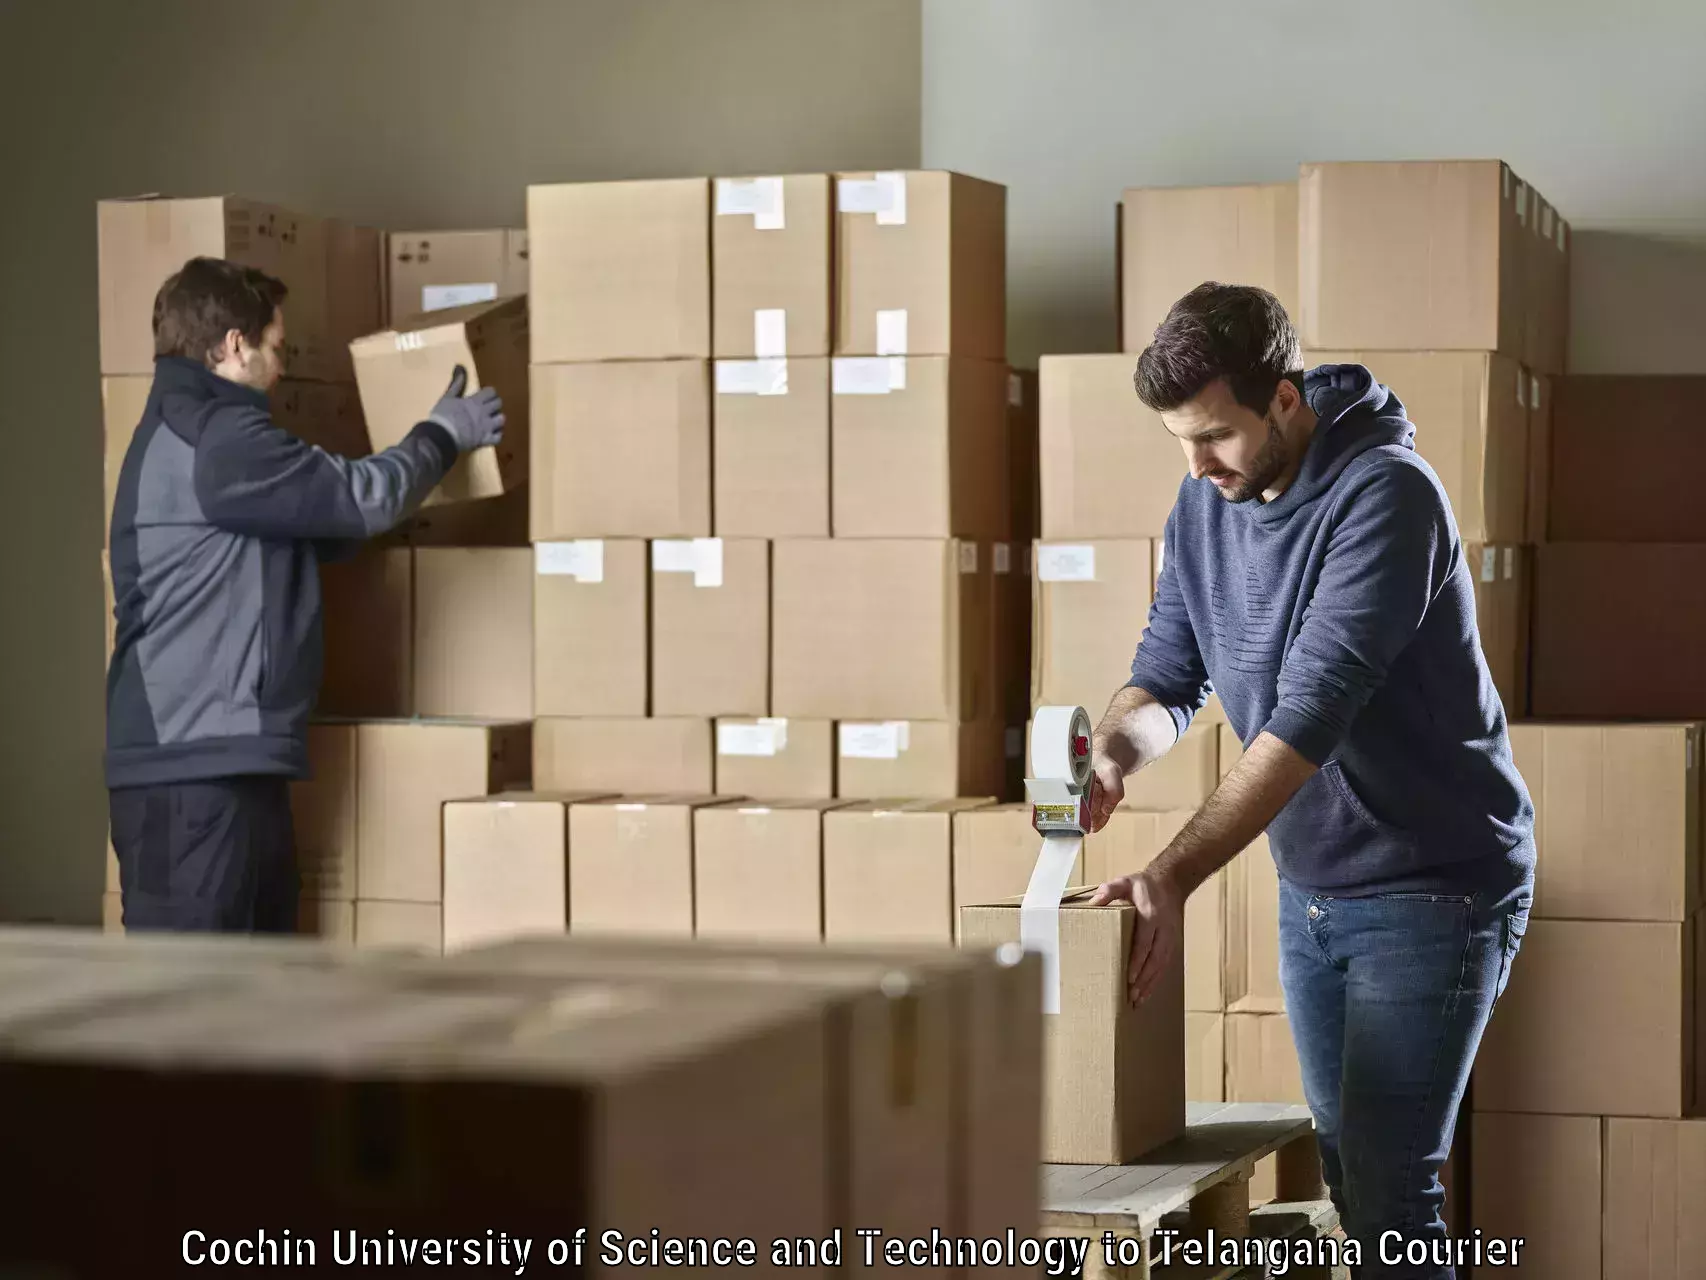 Specialized shipment handling Cochin University of Science and Technology to Telangana